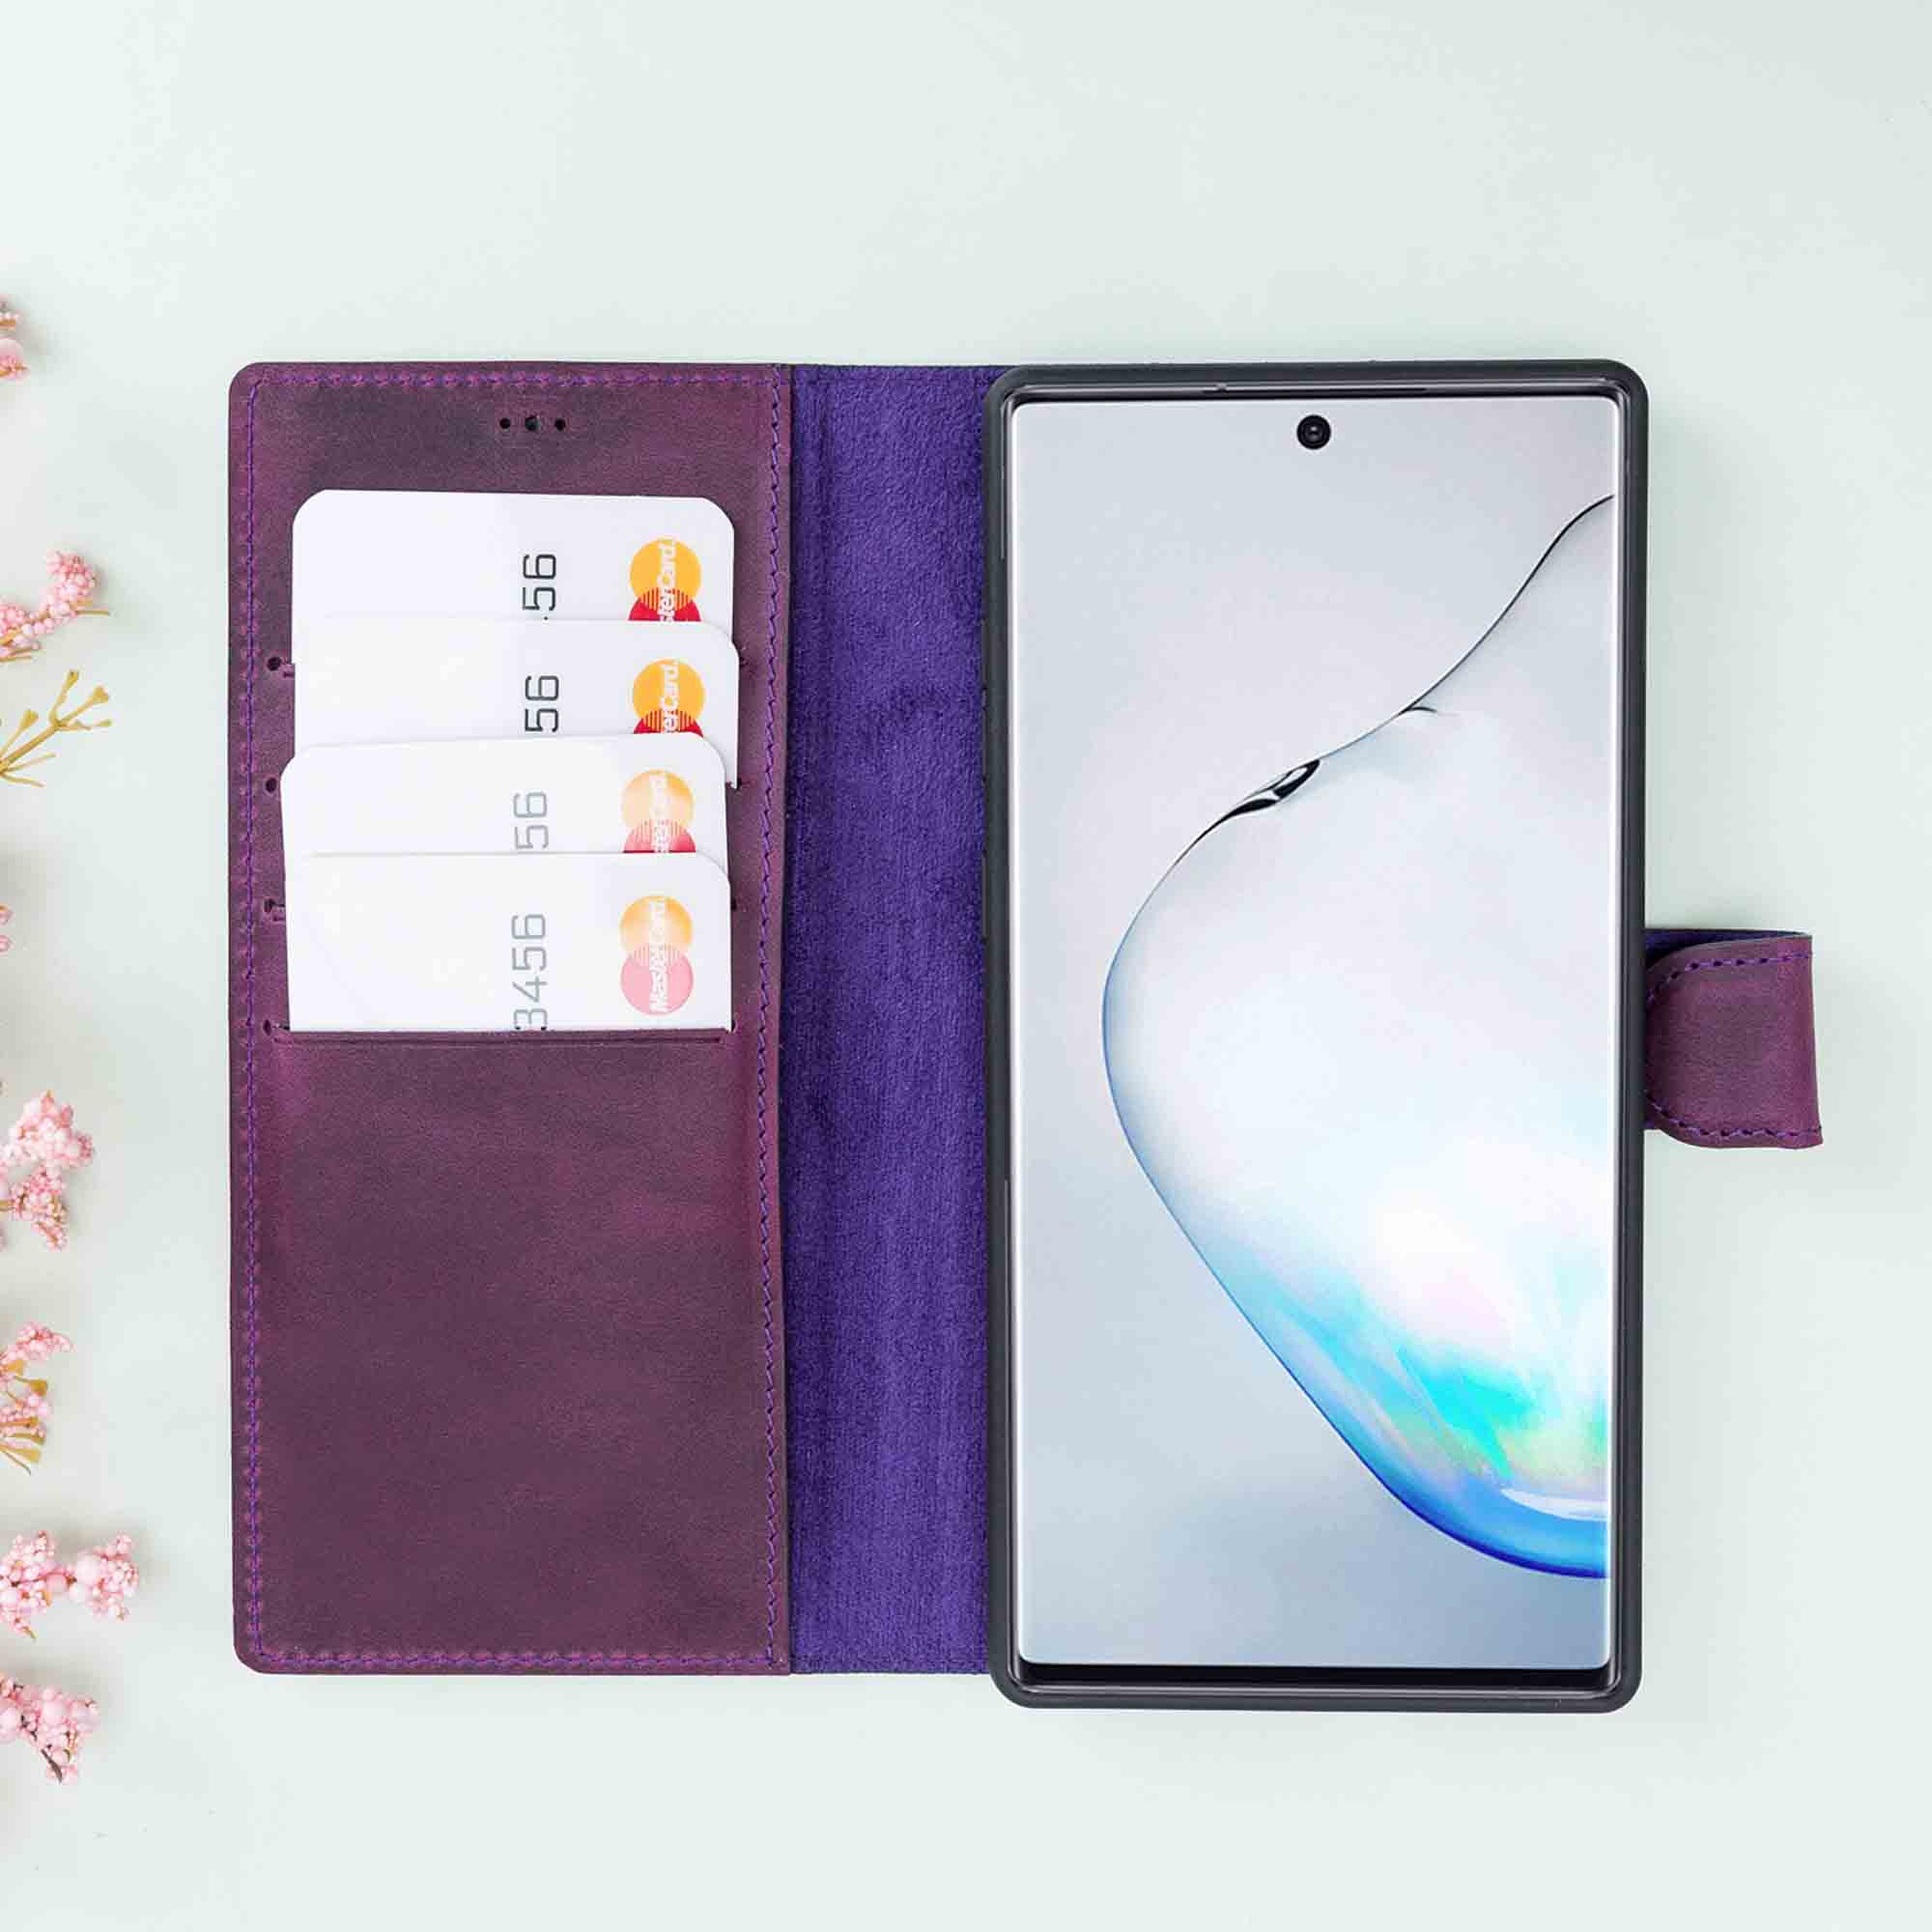 Magic Magnetic Detachable Leather Wallet Case for Samsung Galaxy Note 10 - PURPLE - saracleather